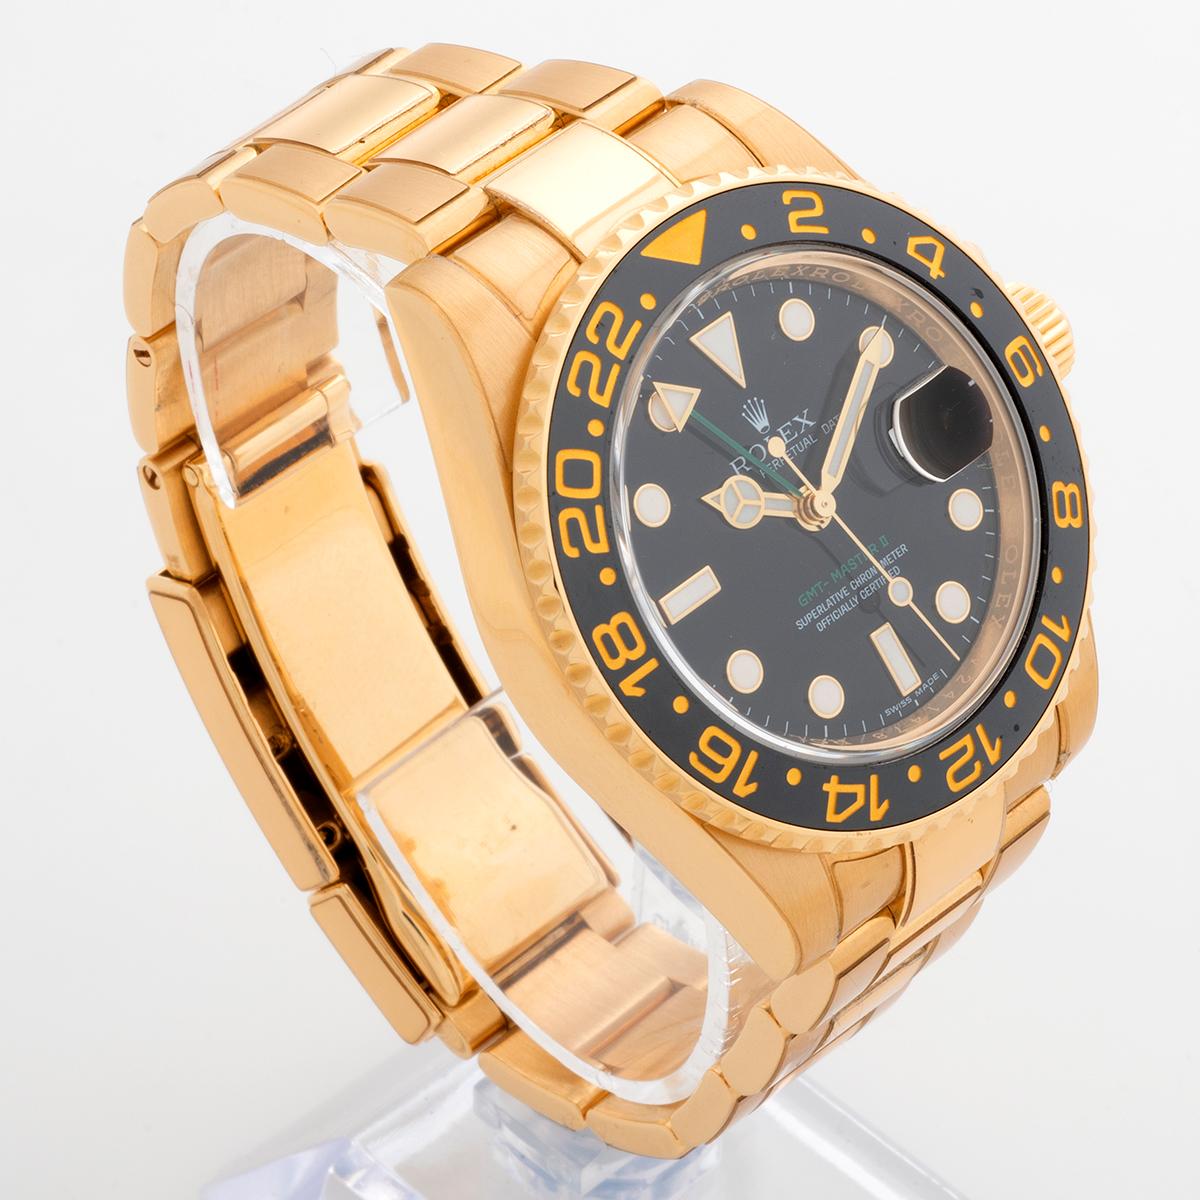 Rolex GMT Master 11 Ref 116718LN Wristwatch, 44mm Yellow Gold Case, B&P's.... In Excellent Condition For Sale In Canterbury, GB